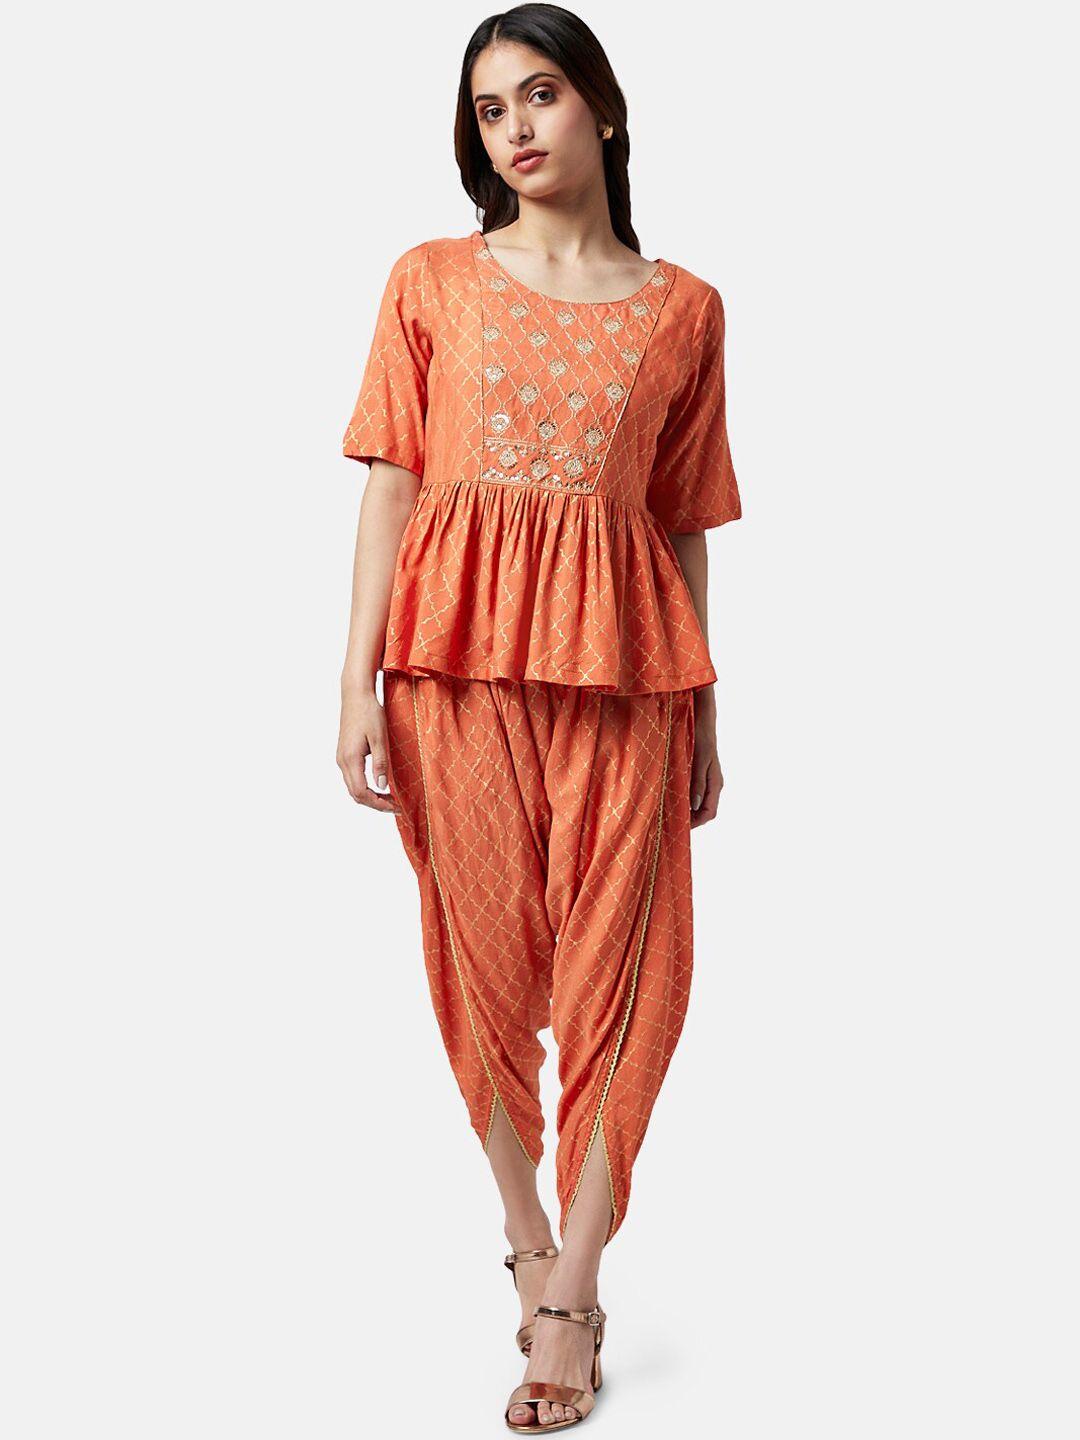 akkriti by pantaloons embroidered round neck a-line top with dhoti pants